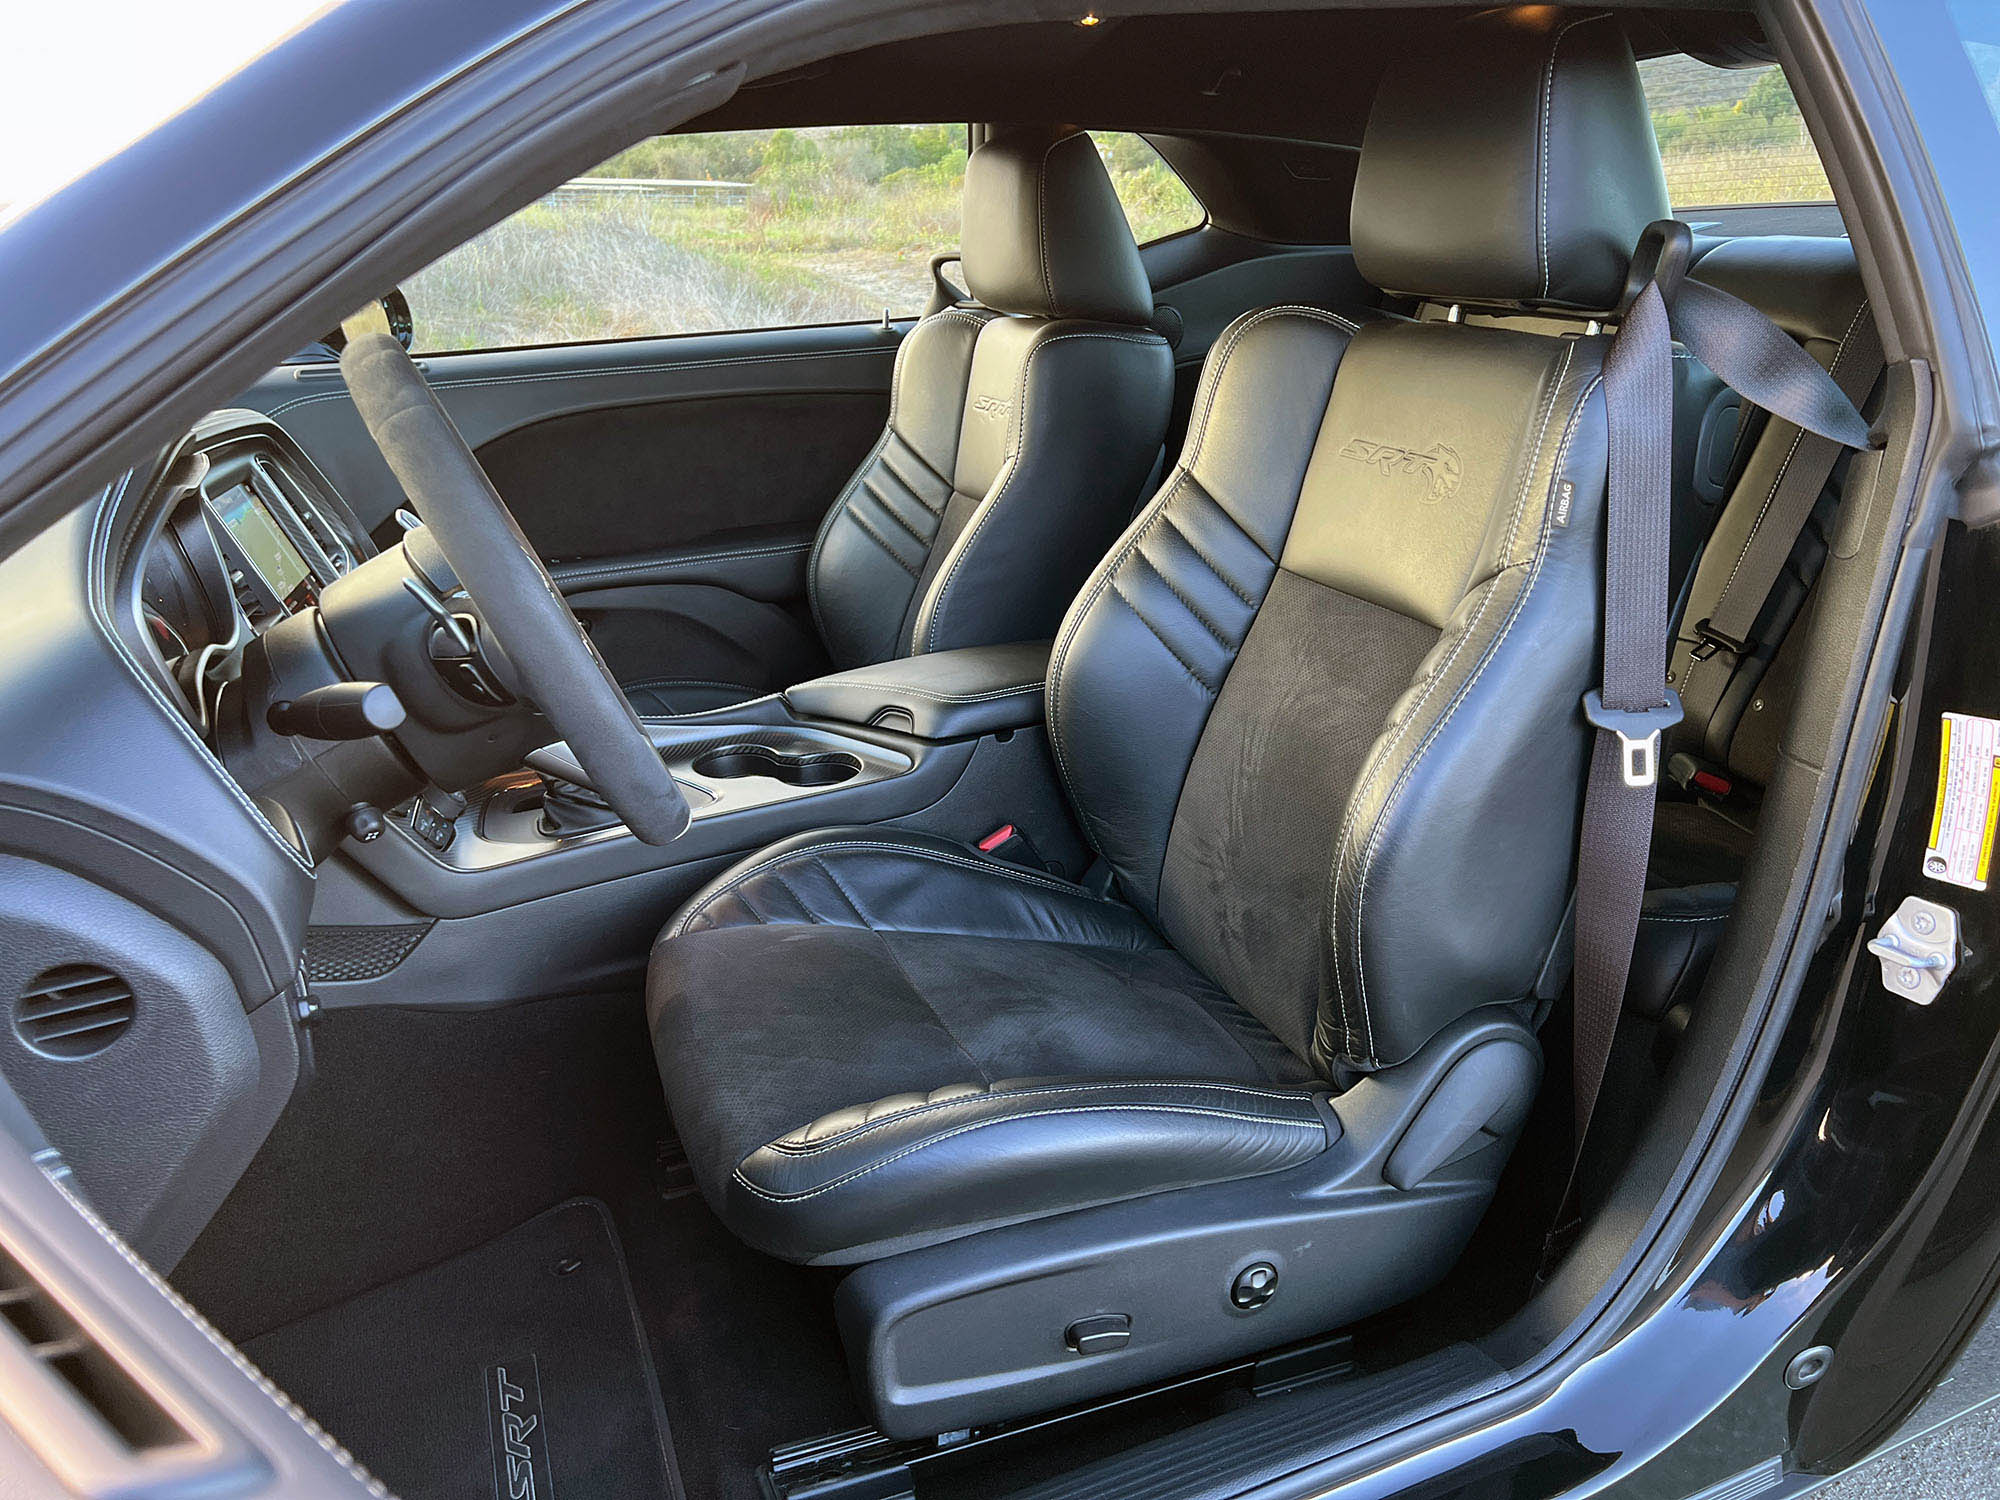 2023 Dodge Challenger Black Ghost interior and front seats.